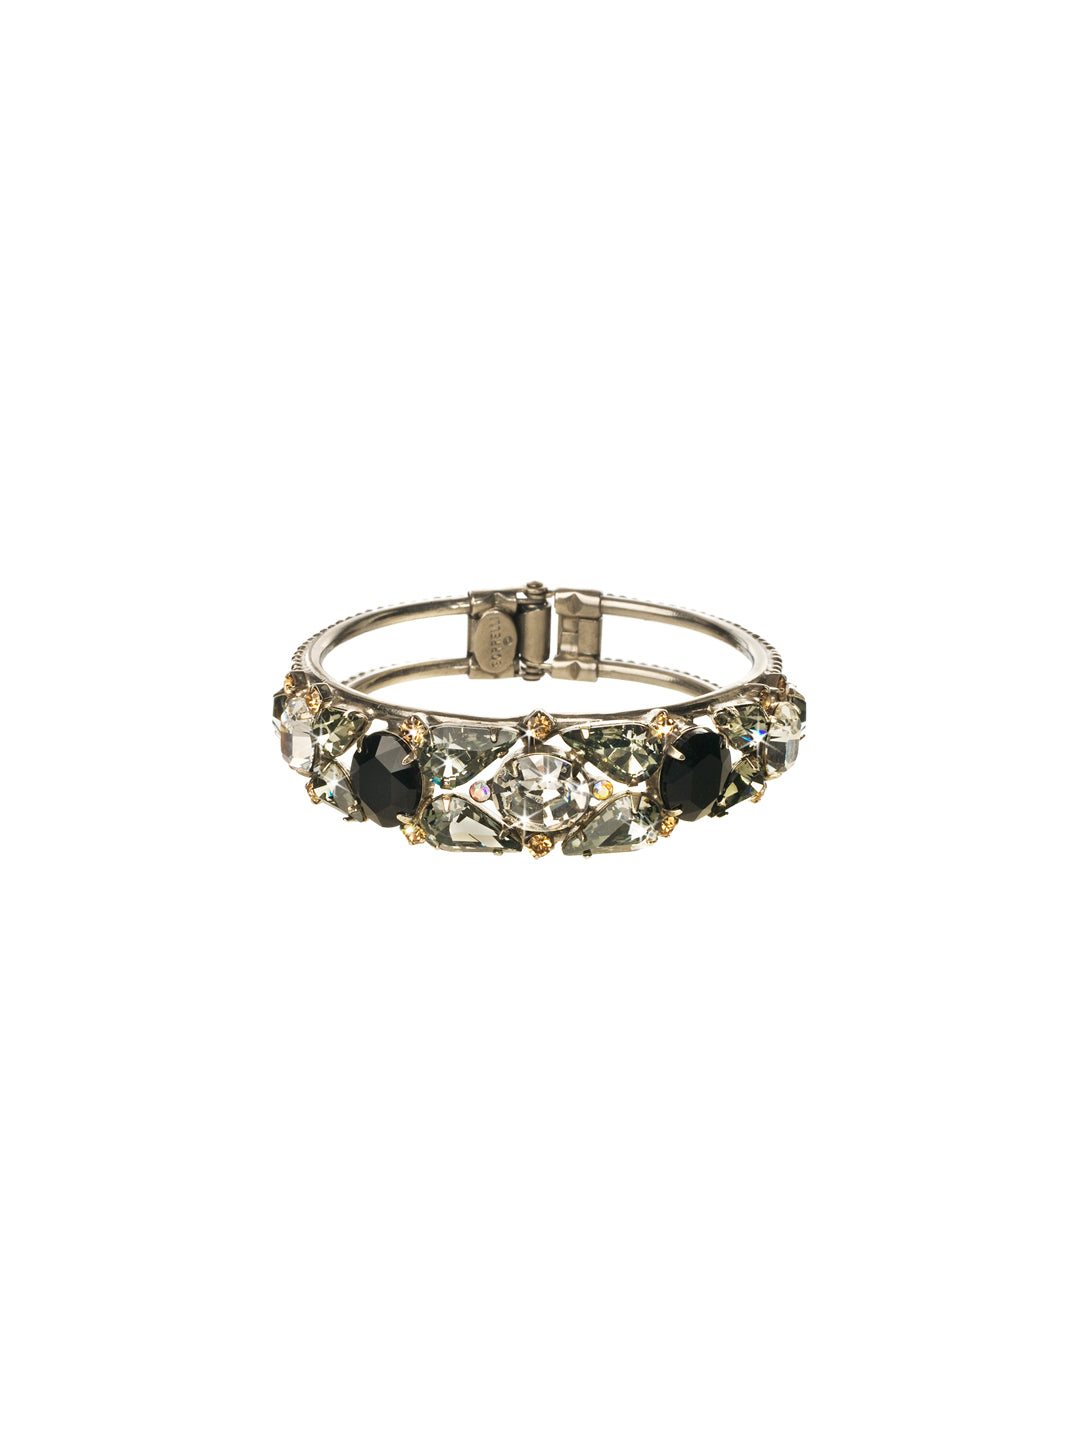 Crystal Cluster Hinge Cuff - BCP5ASEM - Trois, deux, un... fabulous! With gorgeous crystals and vintage accents on a hinge, this comfortable crystal cuff will keep you sparkling all day no matter which way you twist your wrist.